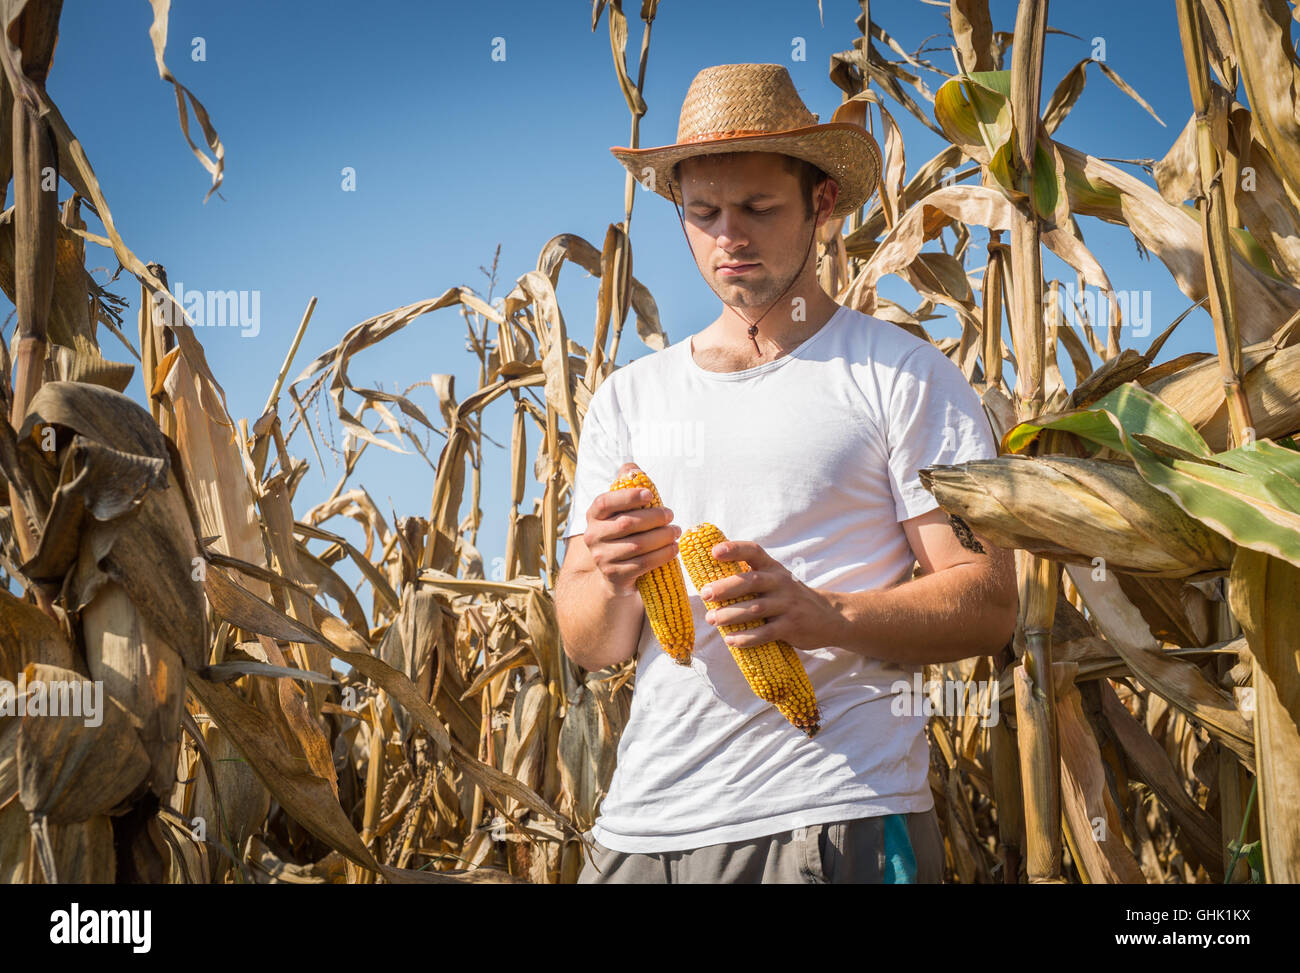 Agriculturist in field of corn Stock Photo